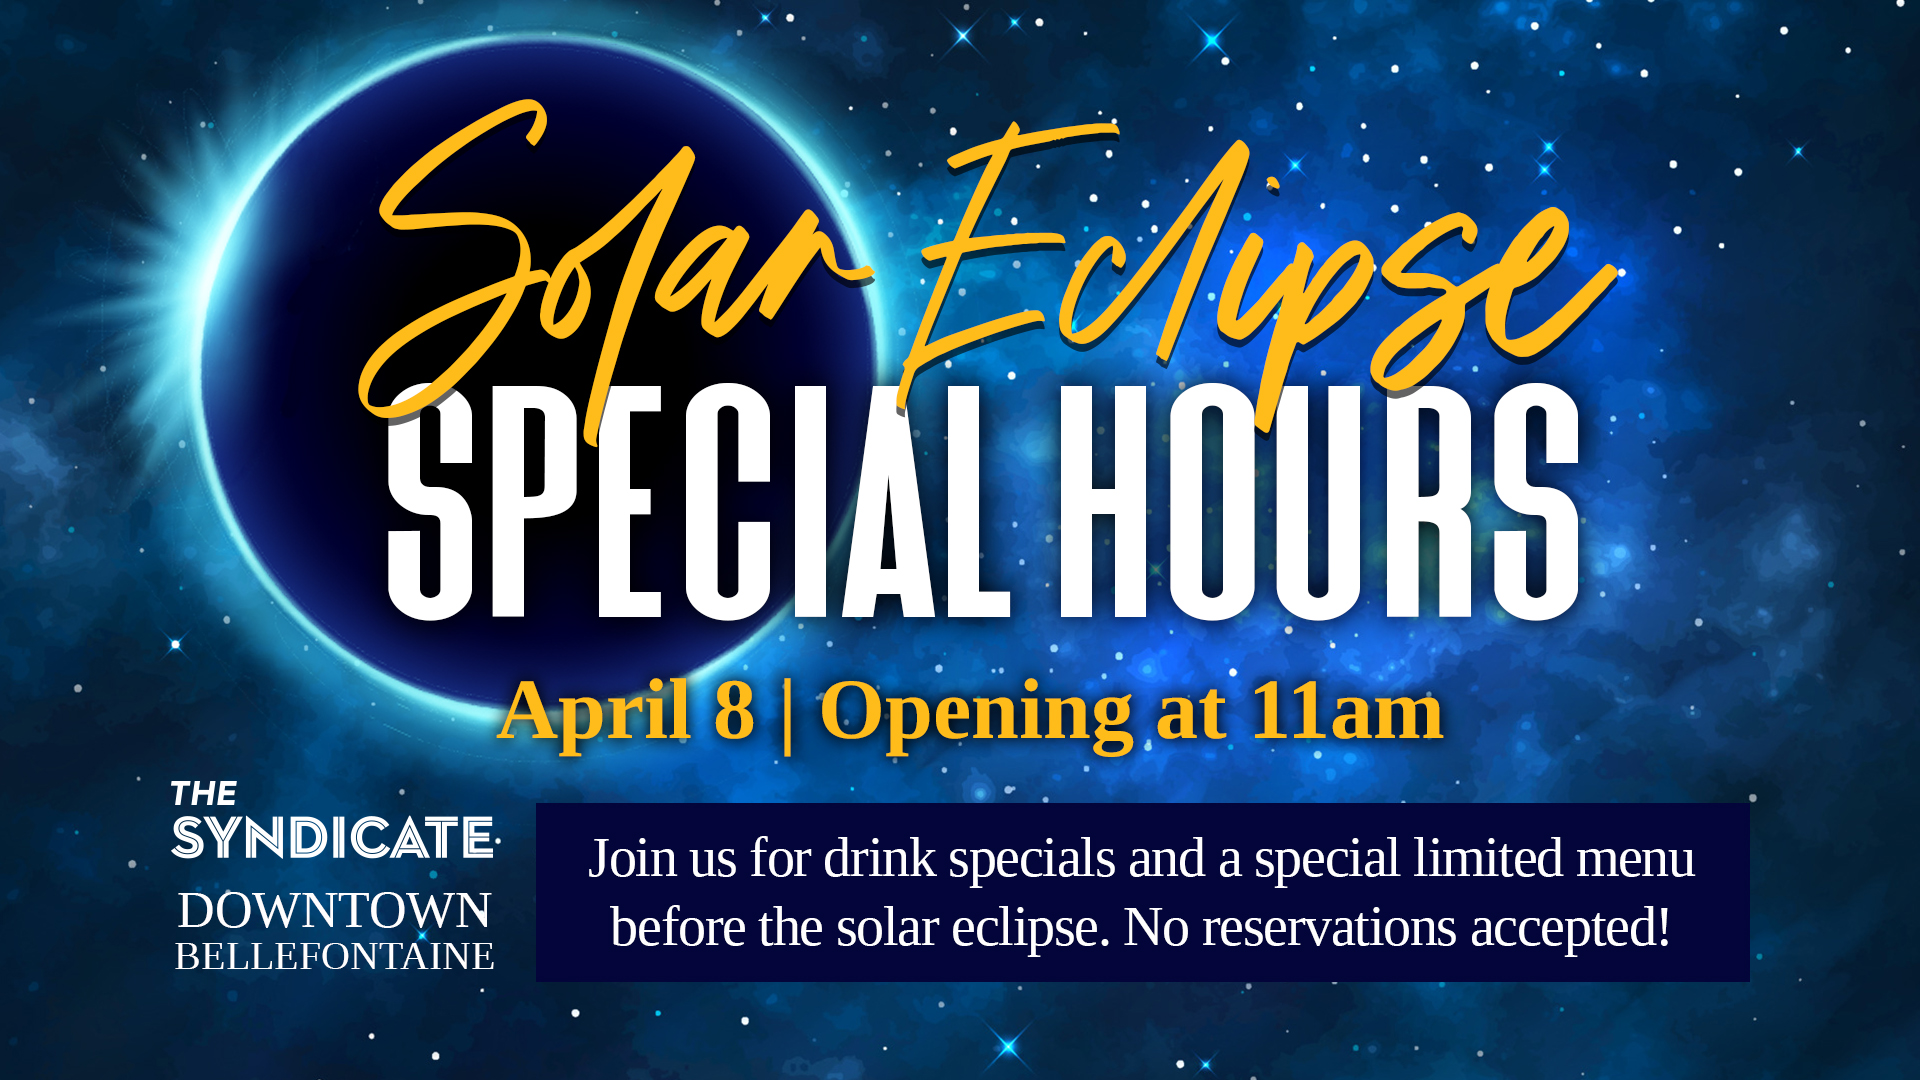 Solar Eclipse Special Hours at the Syndicate